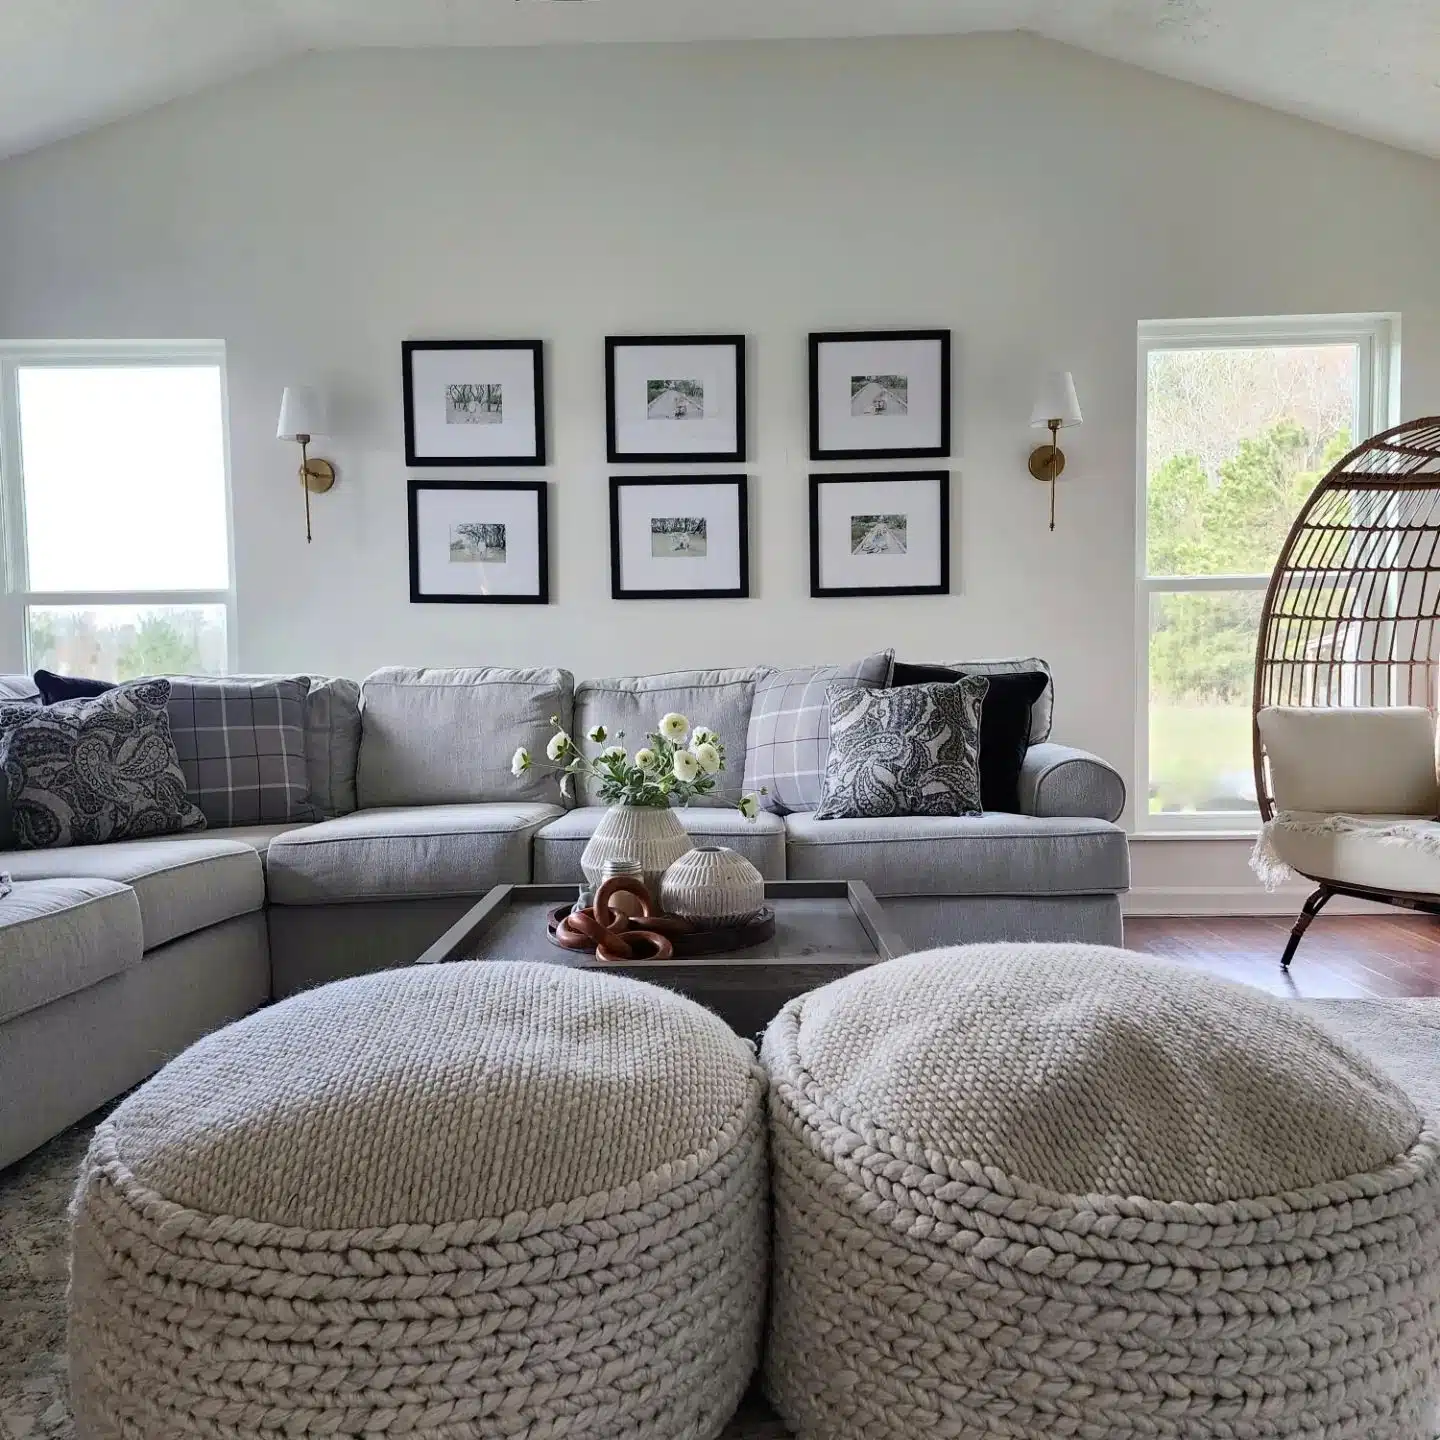 Living room with large sectional, wicker egg chair and knitted poufs